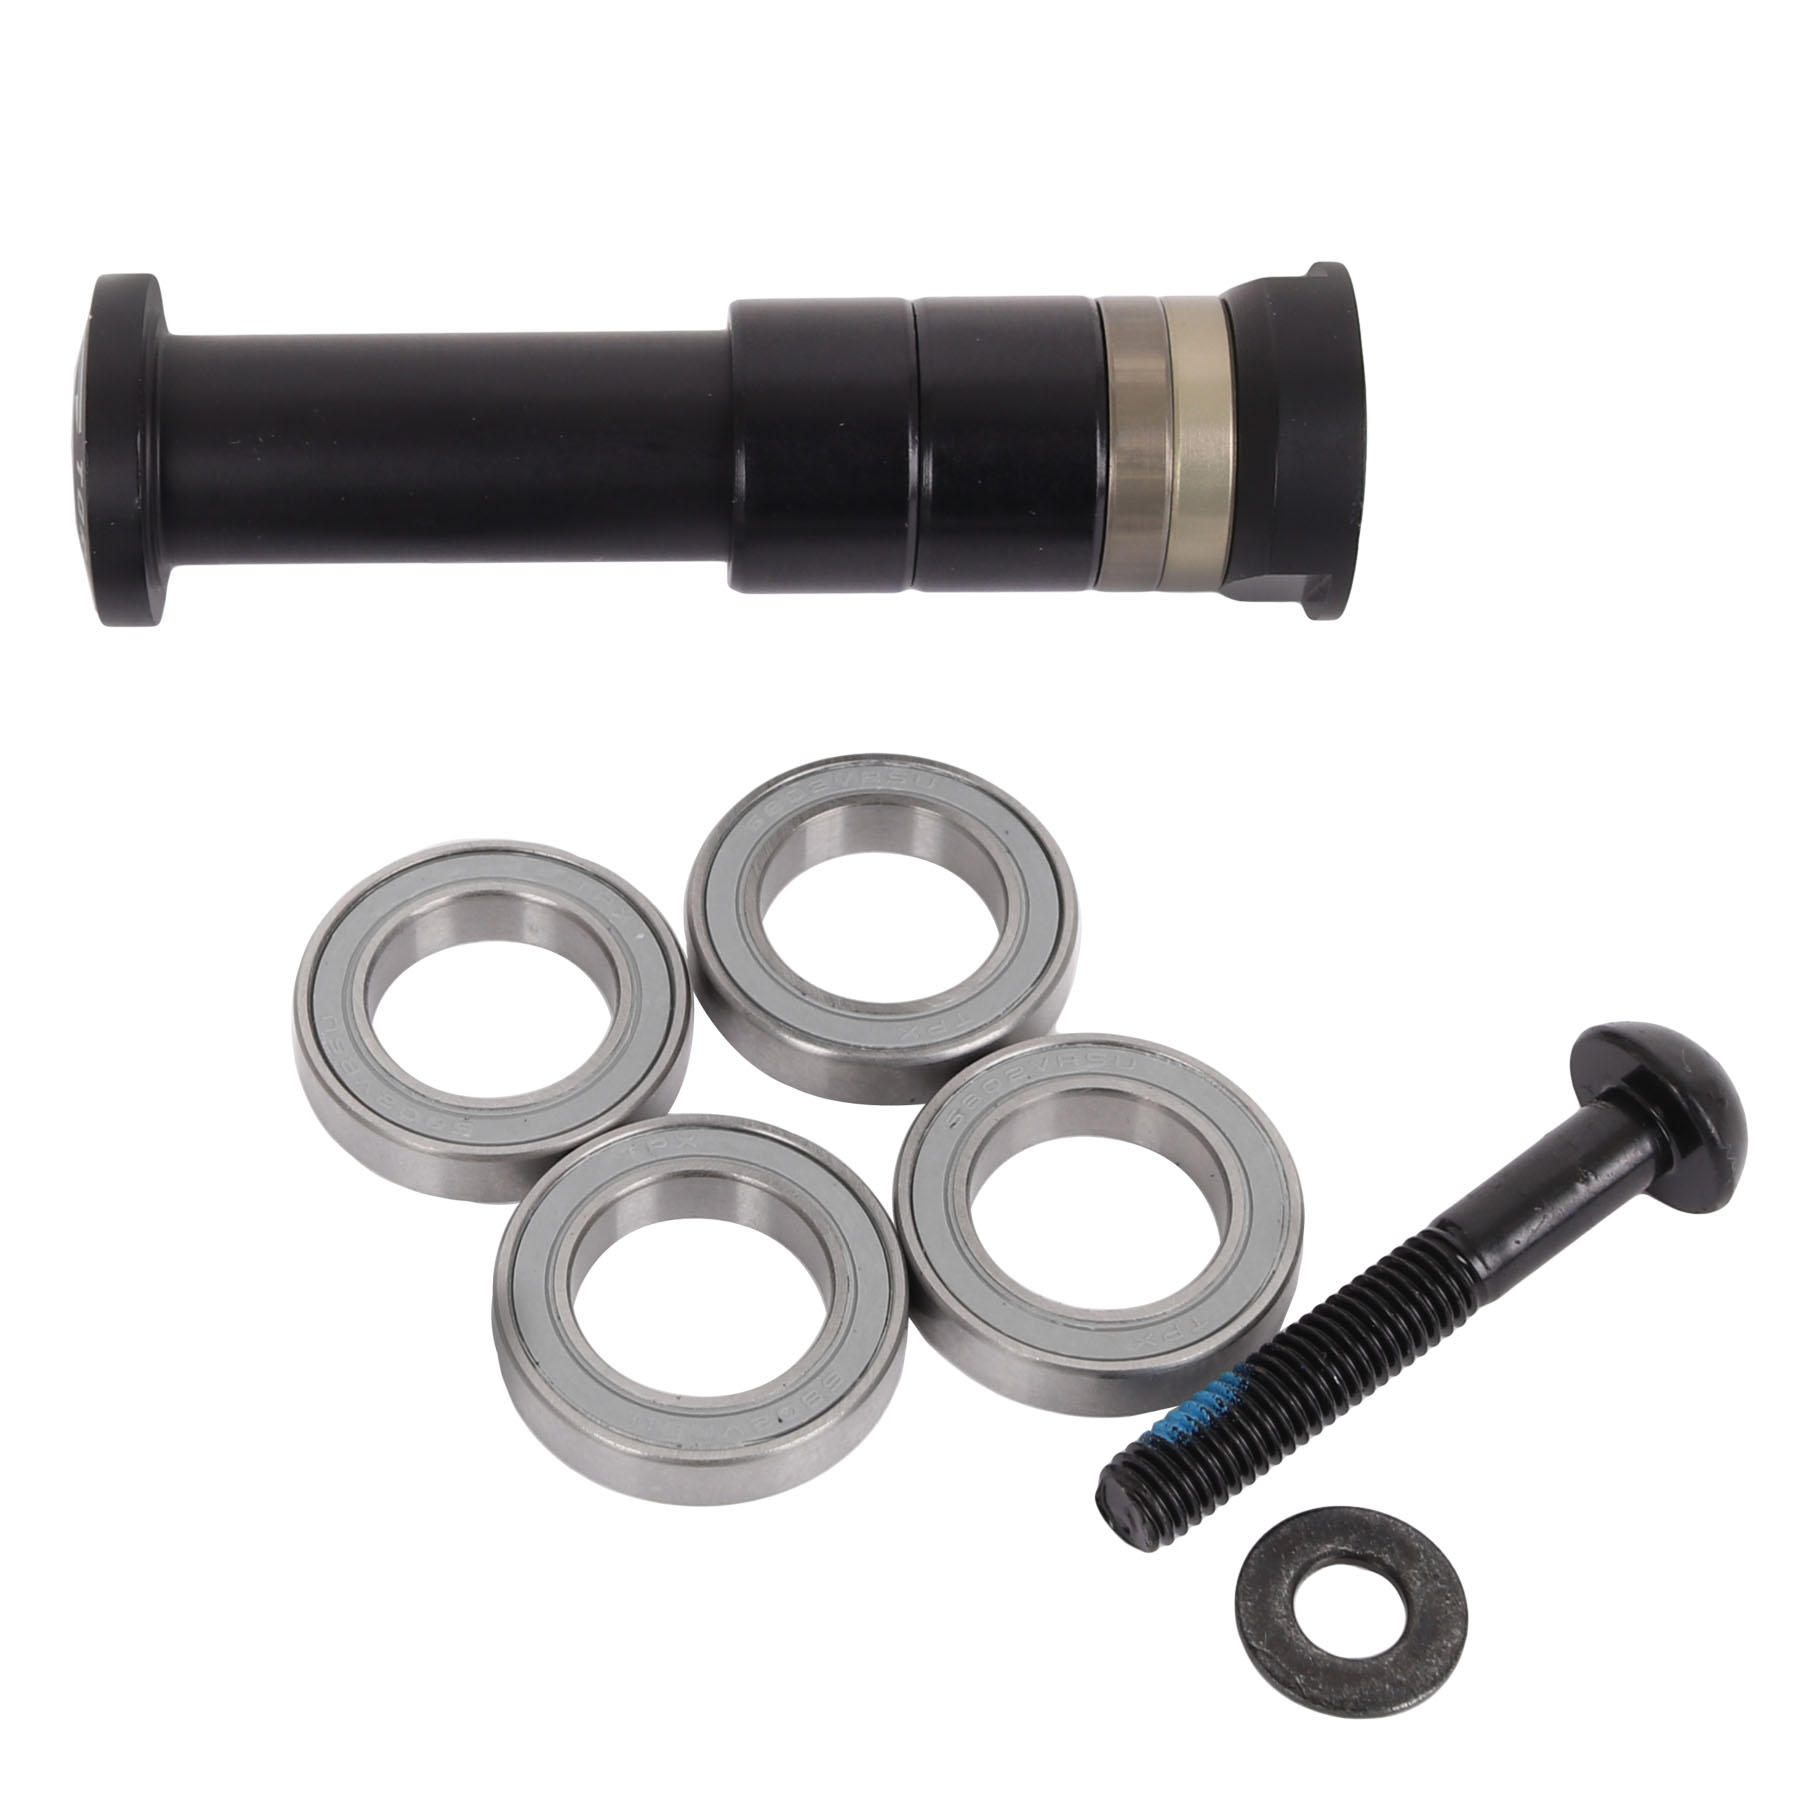 Picture of Giant GM7134 Rear Shock Accessories for Stance E+ | Shock Bolt - 1280GM713401A1